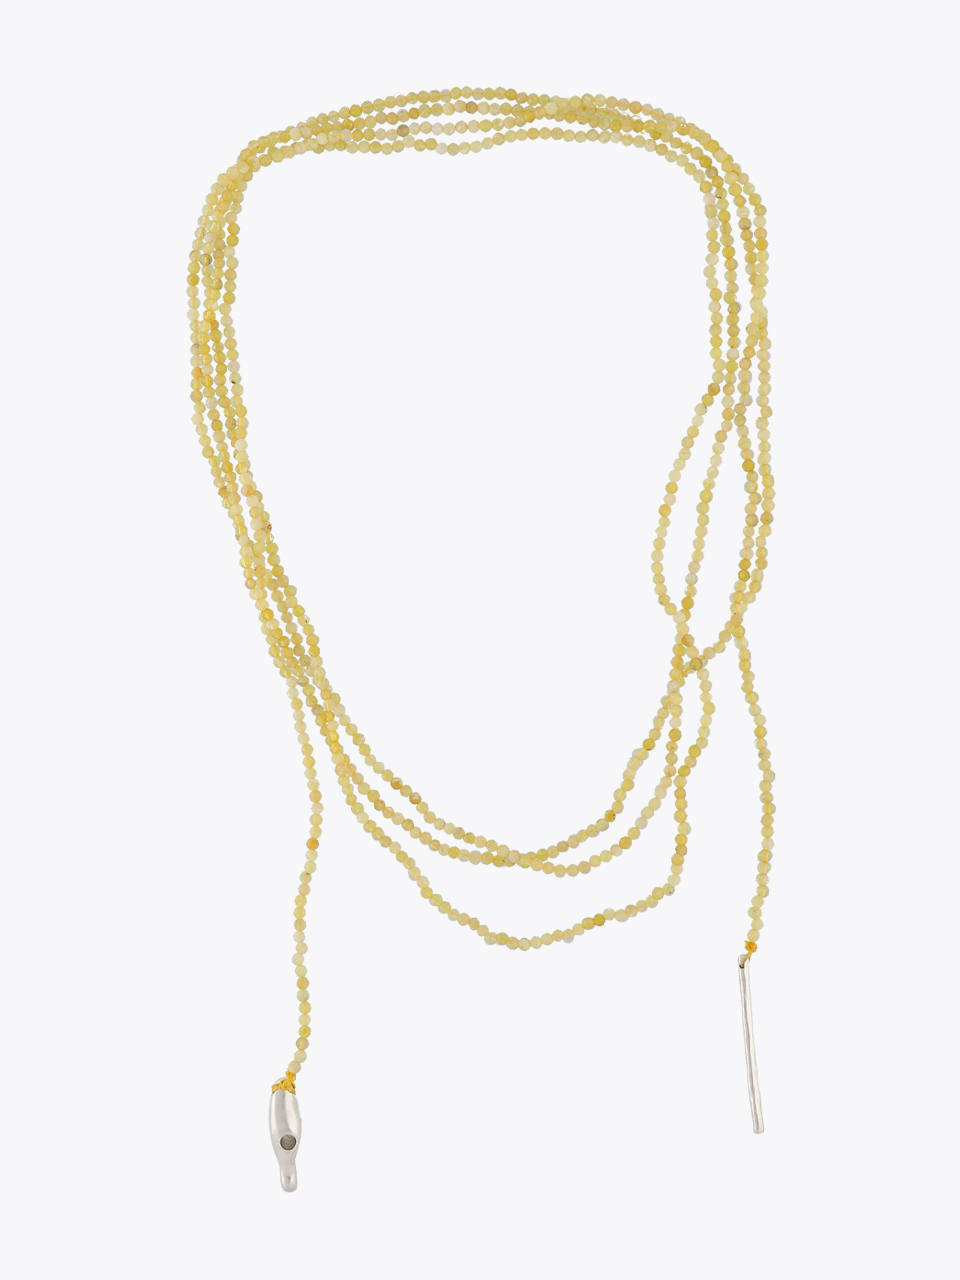 Stone scarf necklace - Yellow